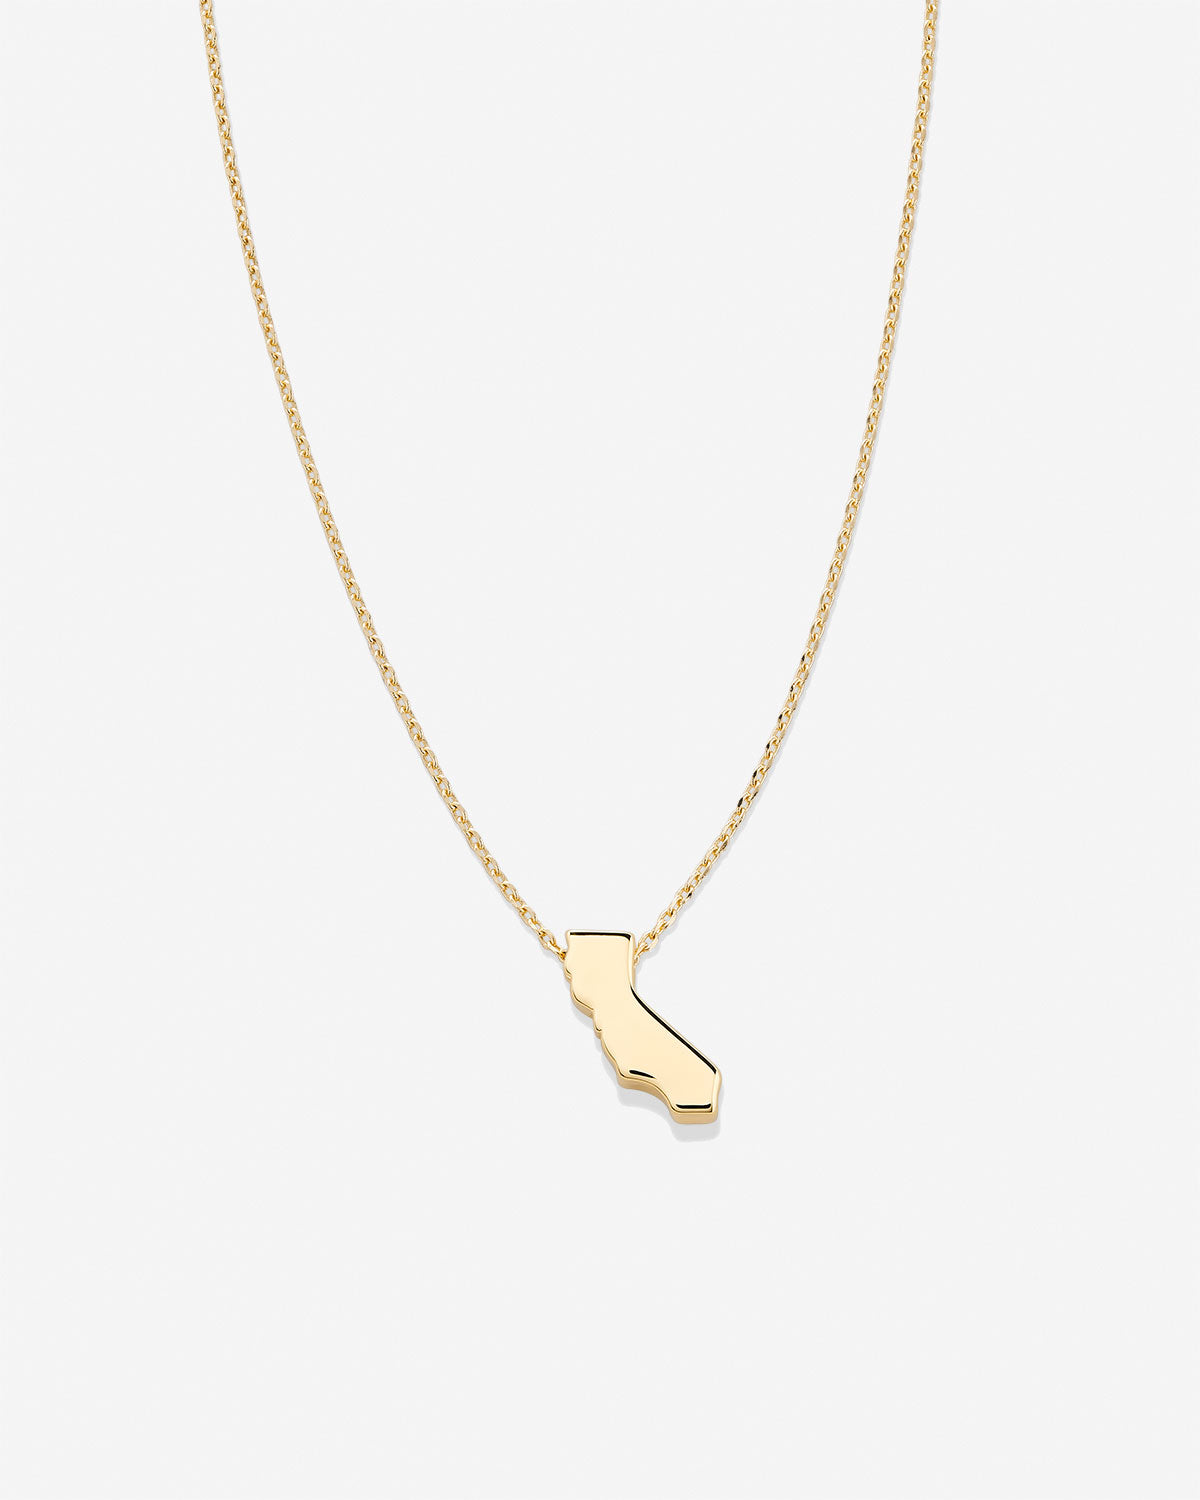 California Golden State Necklace In Gold and Rose Gold – Shop at Goldie's